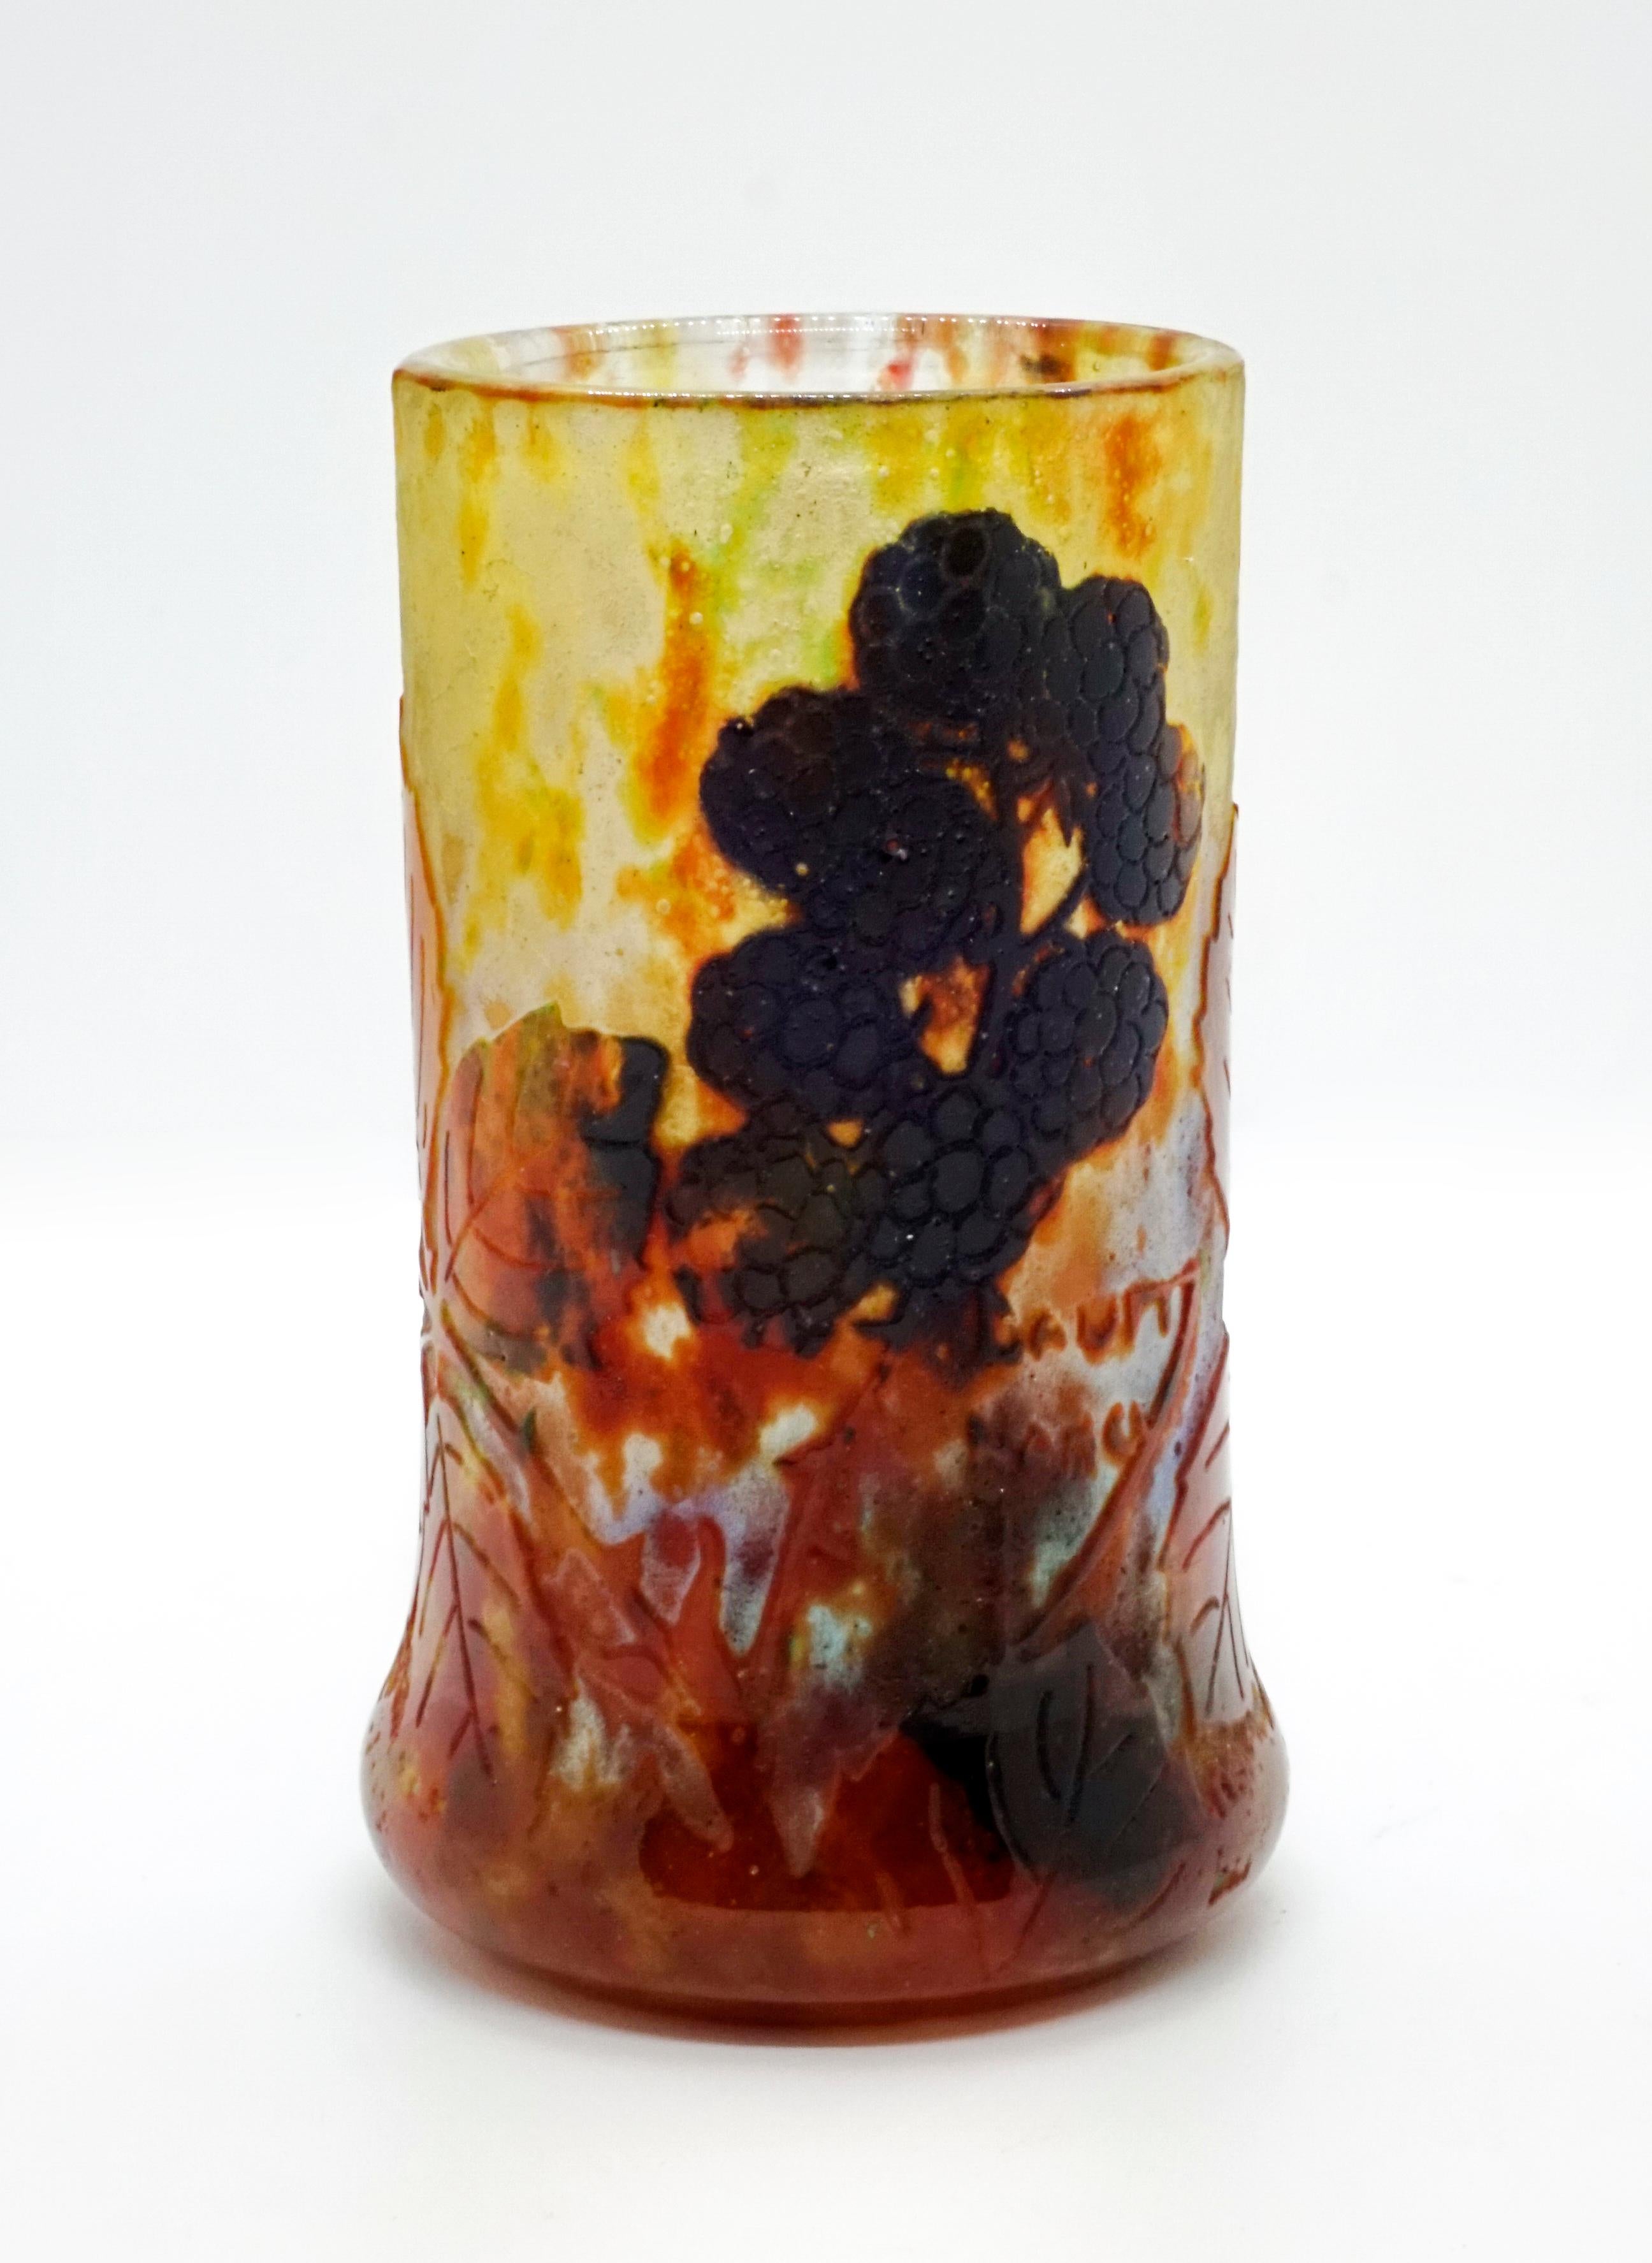 Cylindrical vase, colorless glass with flaky yellow-green, rust-red and blackberry-colored powder melts, overlaid in several layers, blackberry and leaf motifs worked out in high cut, satined, structured surface, relief signature 'Daum Nancy' with